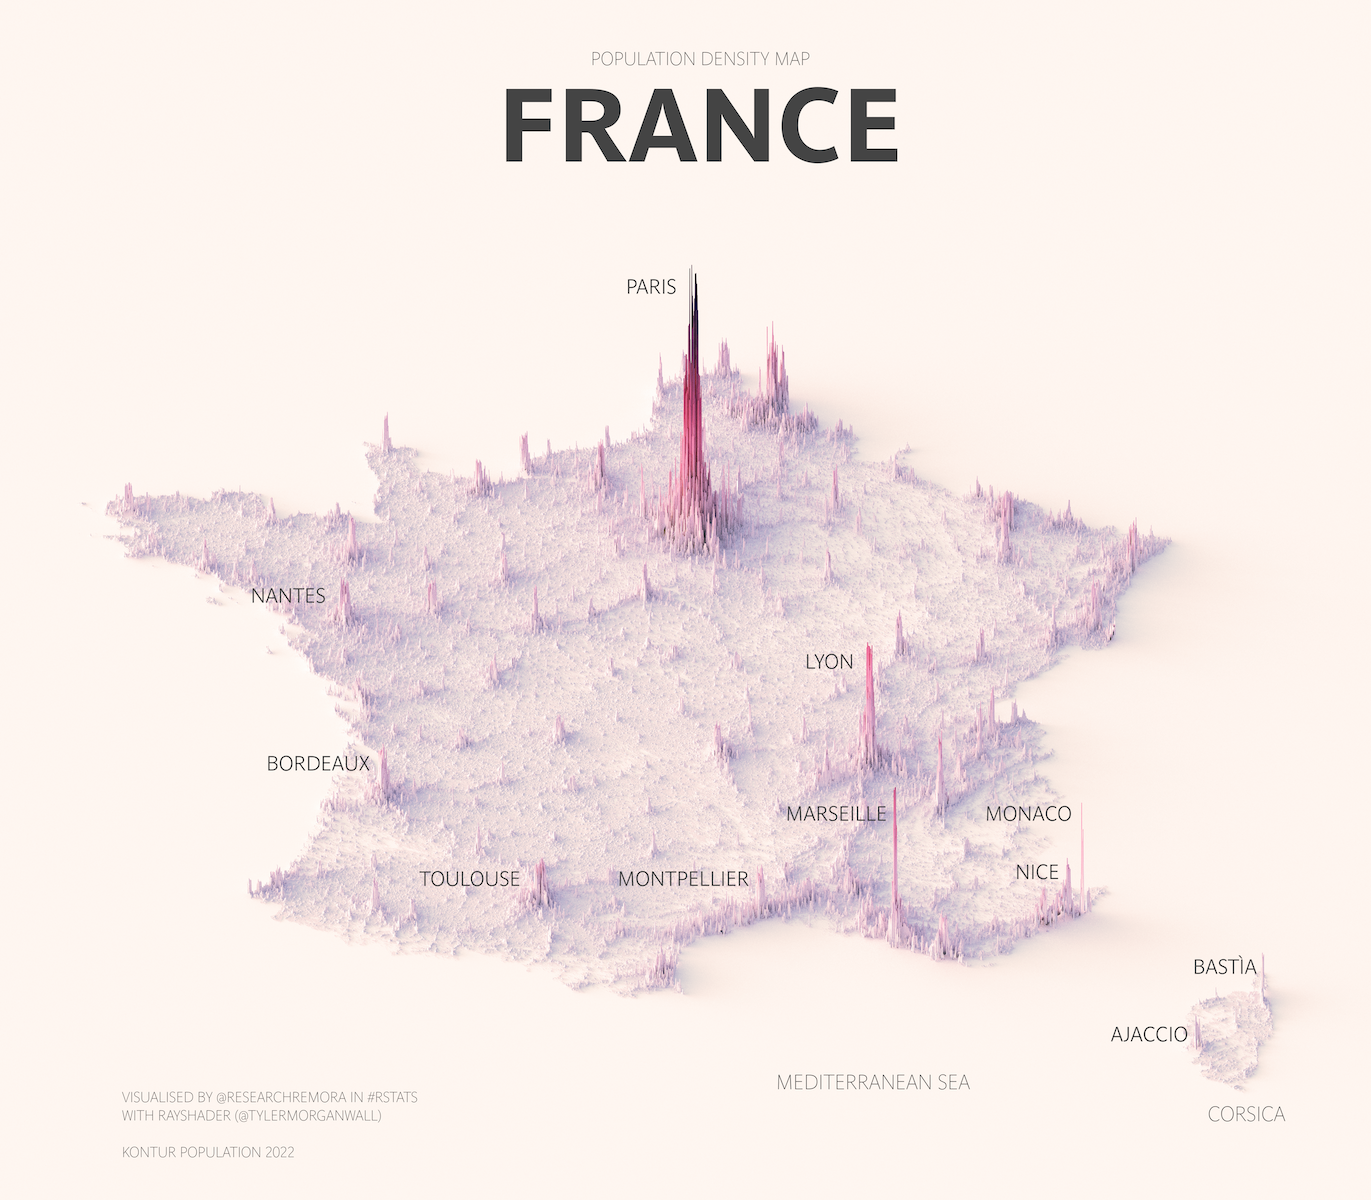 This image shows a map of France and its population spread.